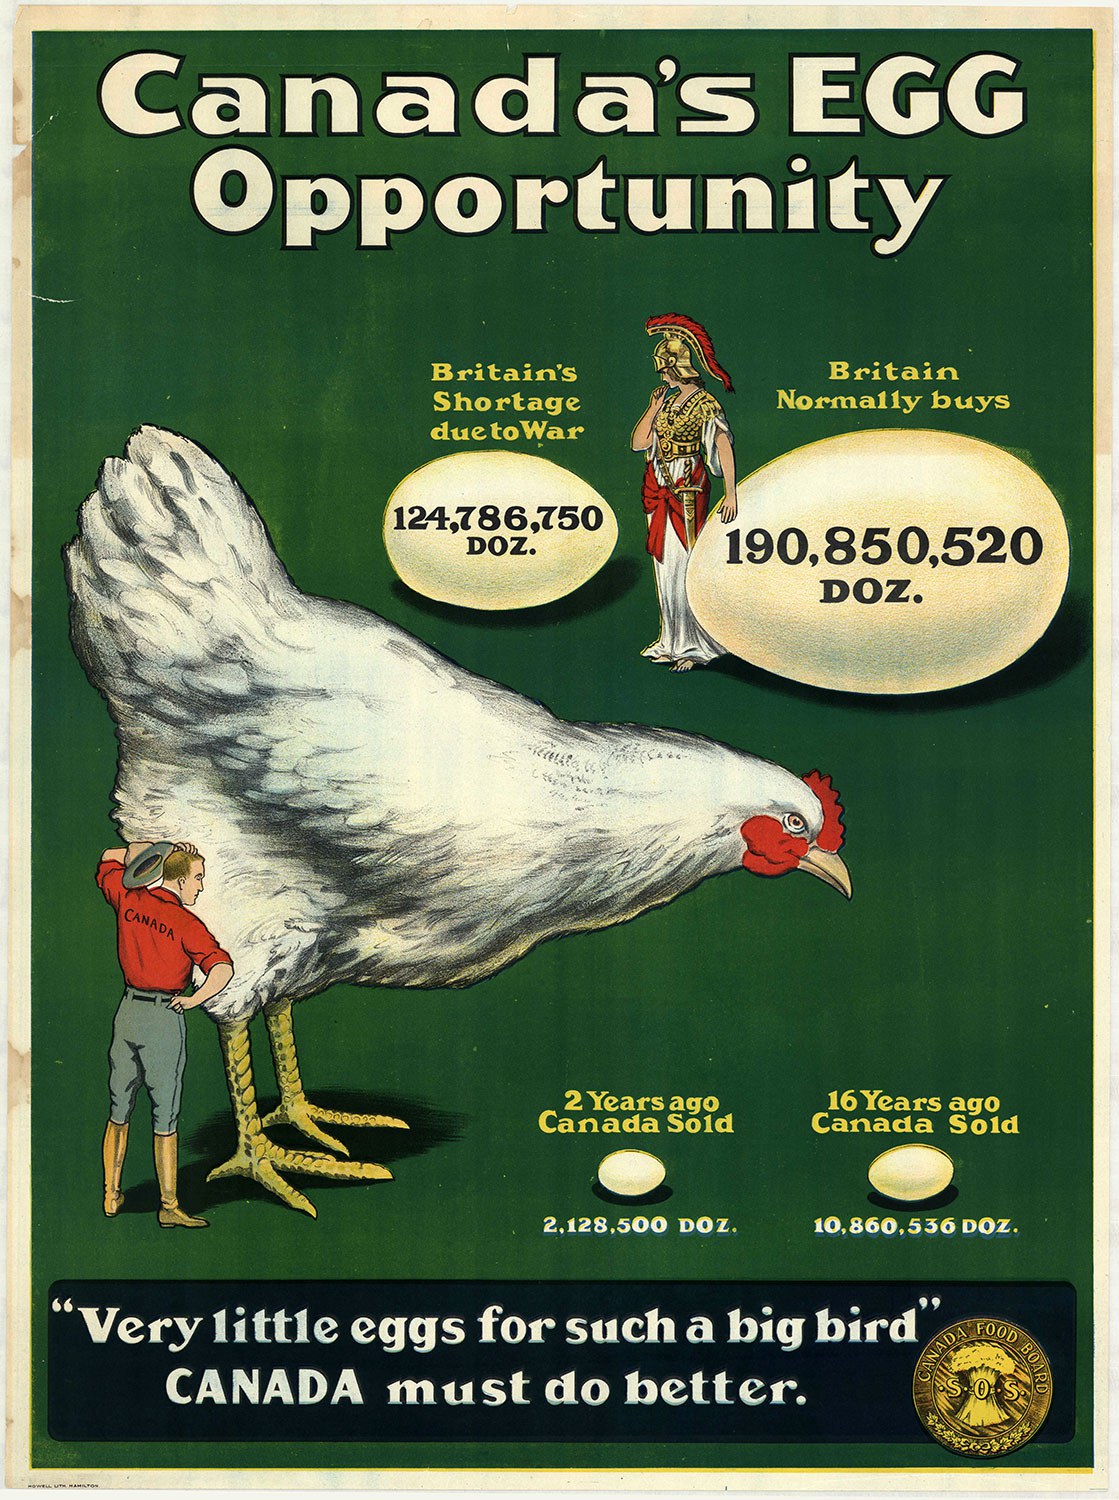 Canada’s Egg Opportunity, Commission canadienne du Ravitaillement